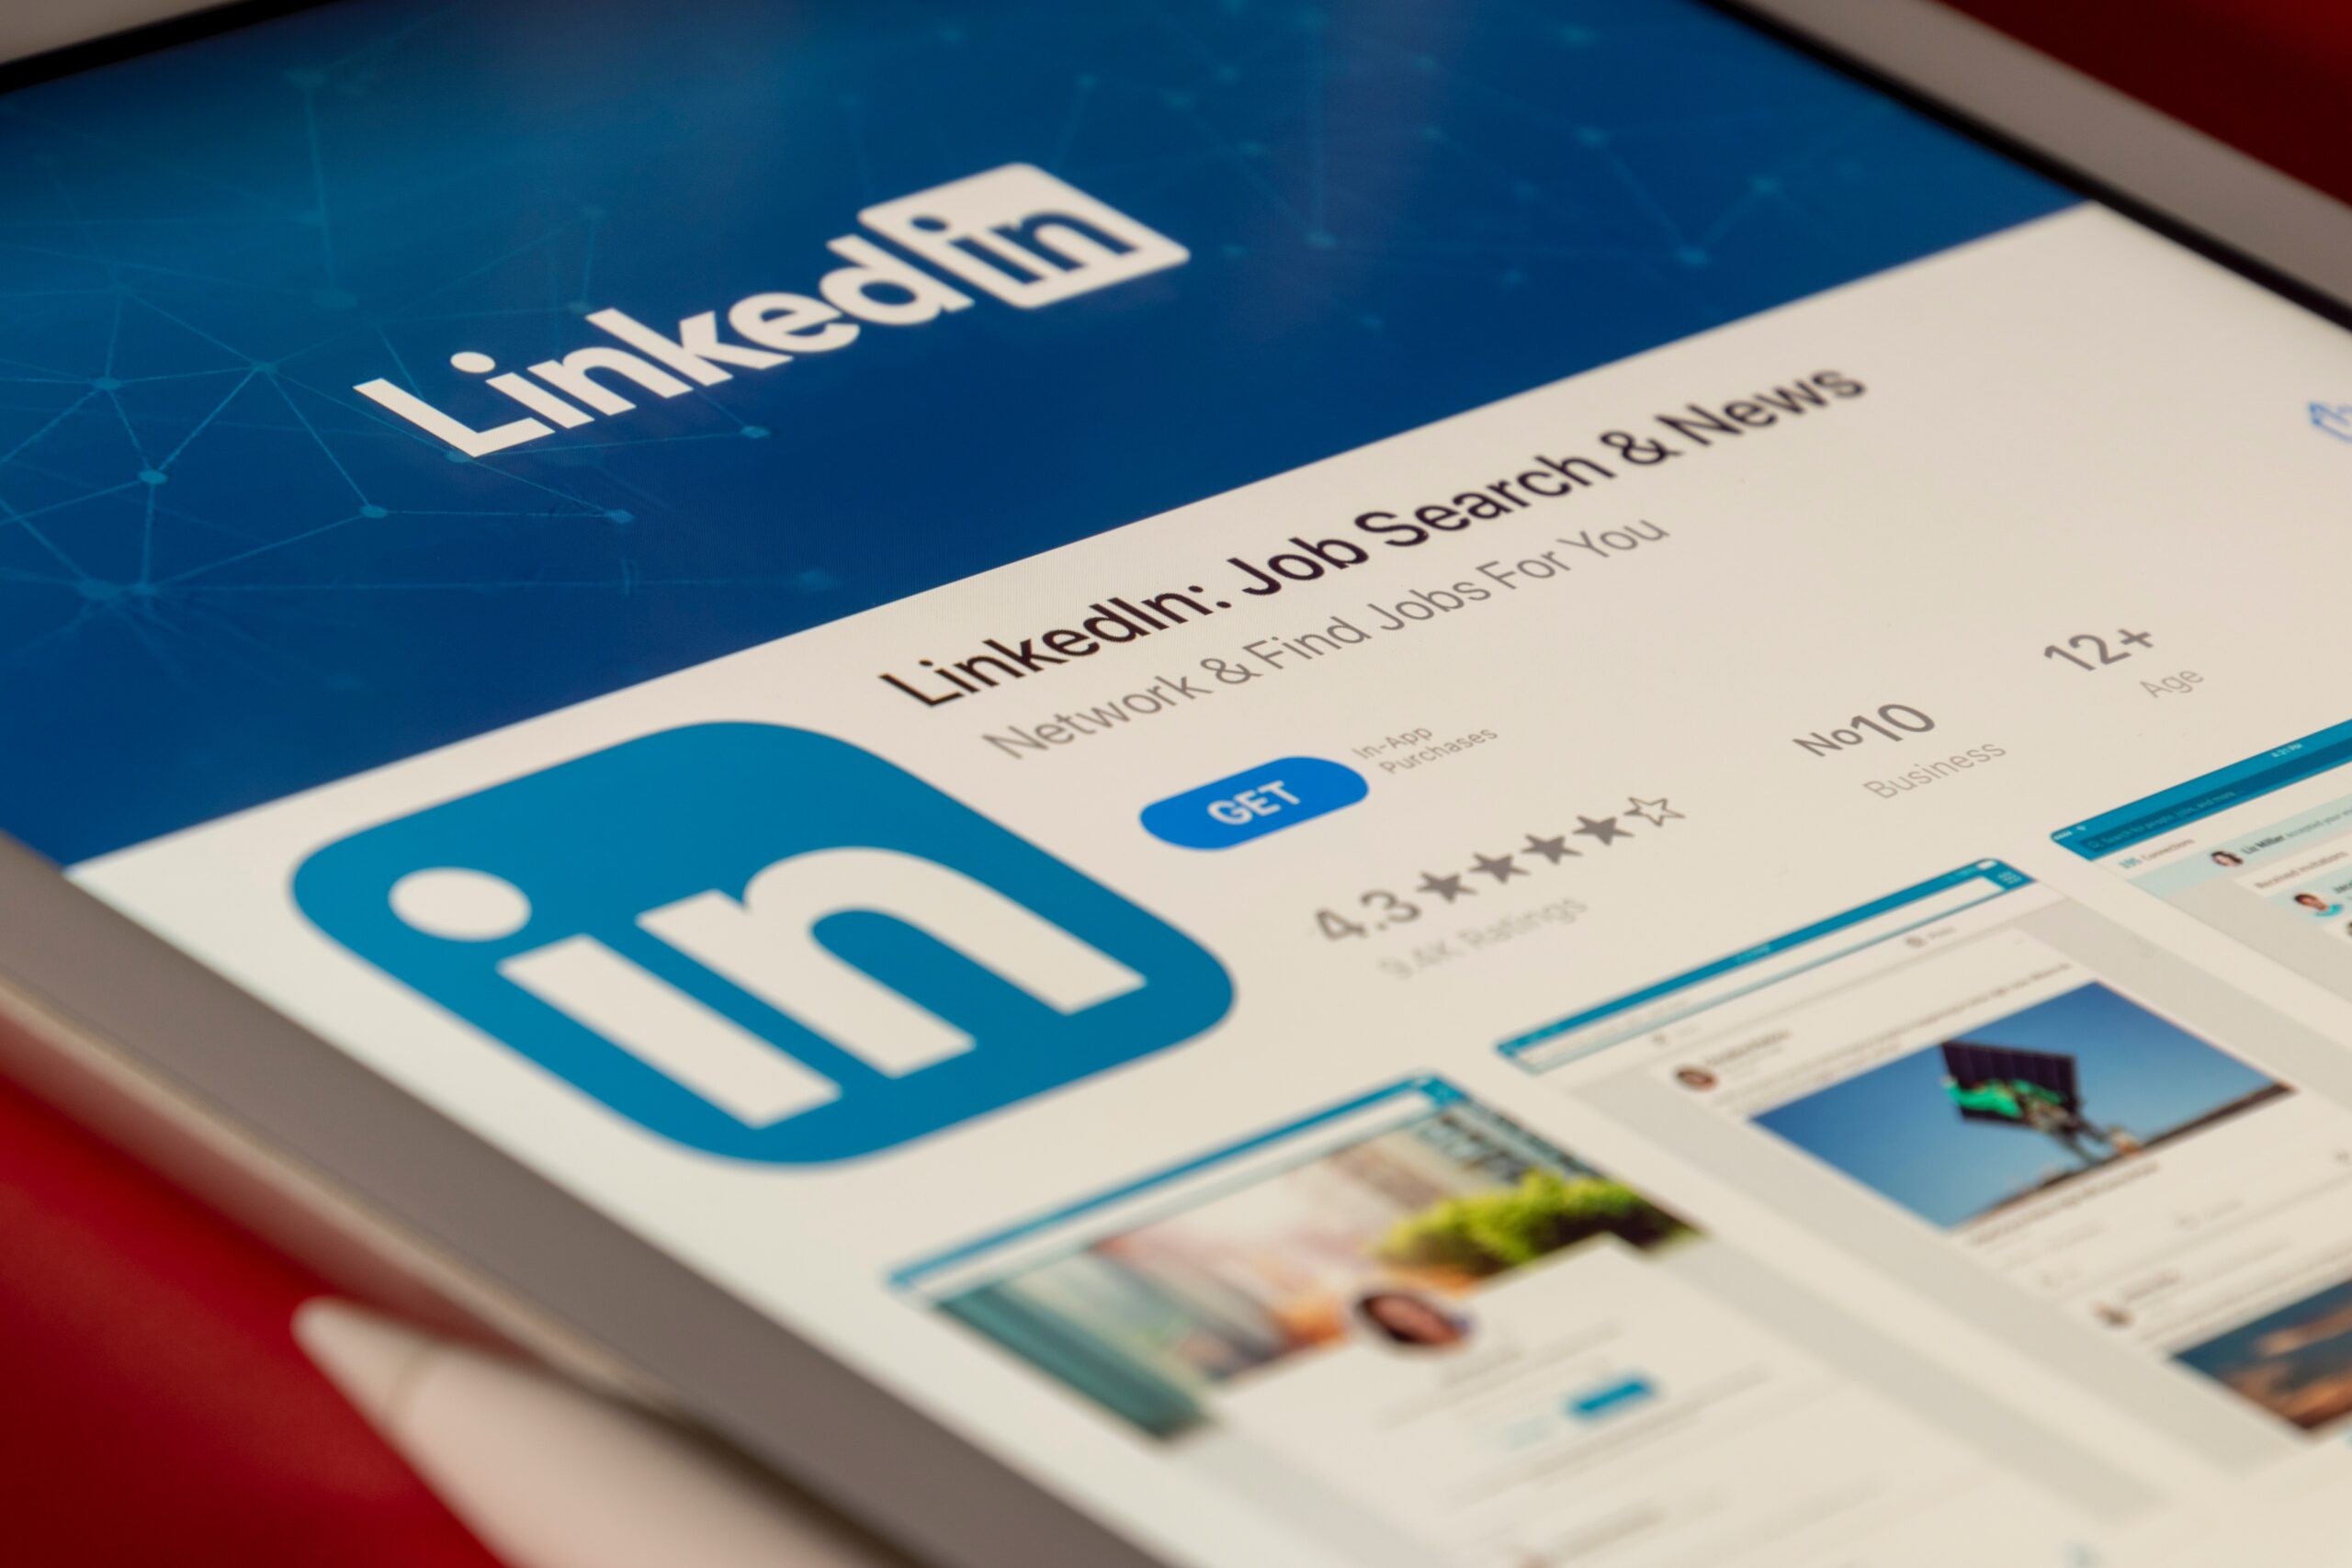 04 Tip To Know How Do You Grow Your Network on Linkedin